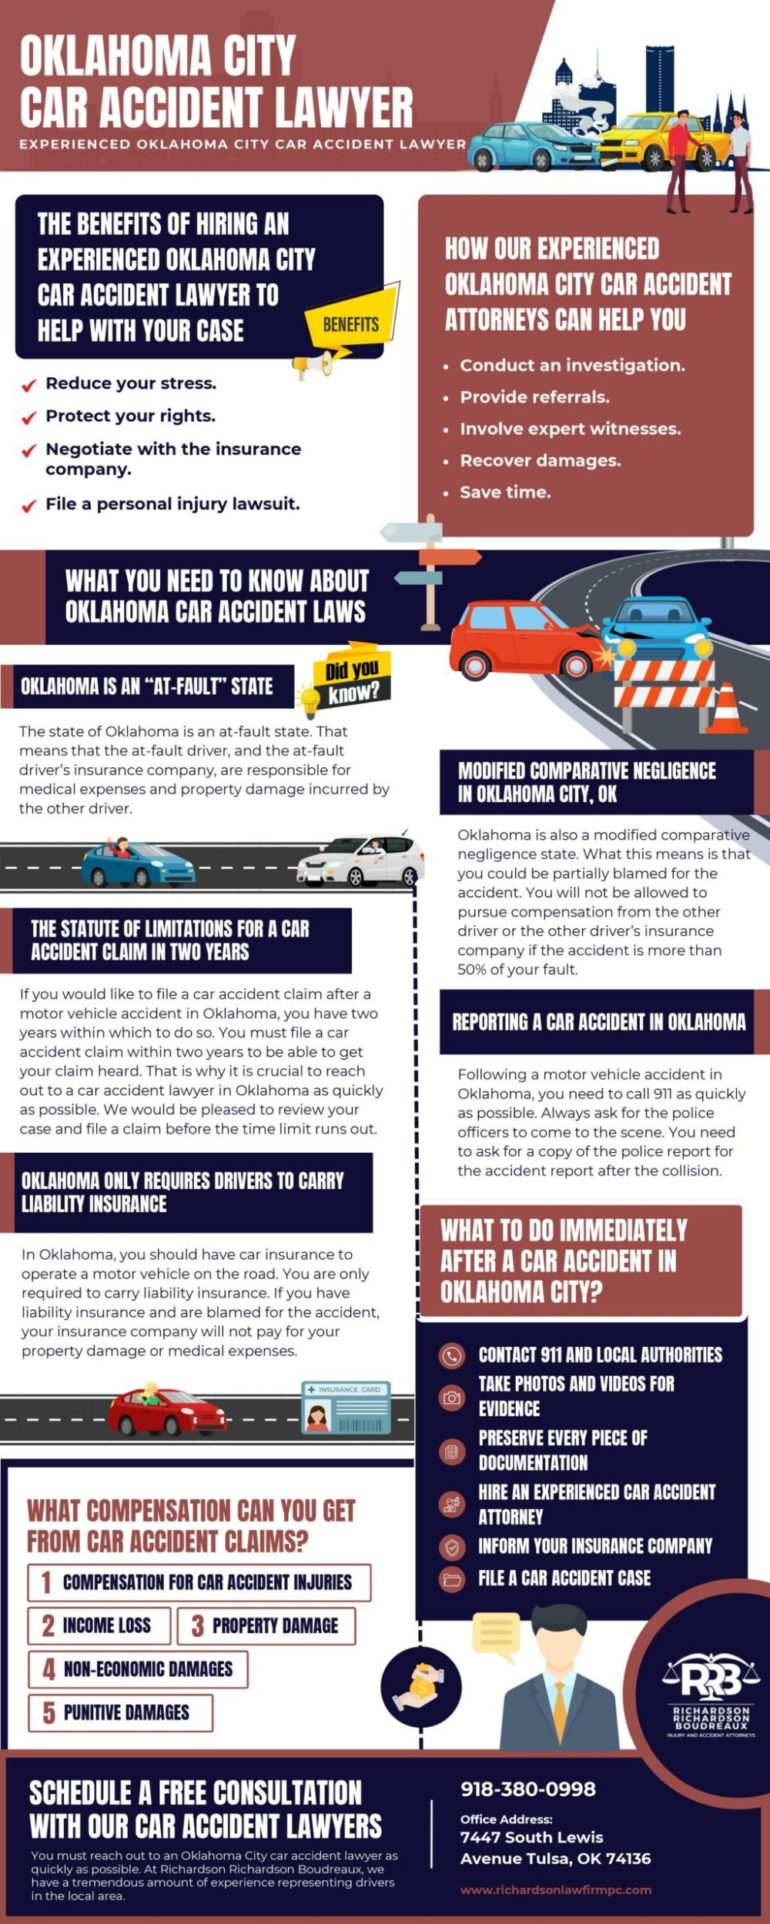 Oklahoma City Car Accident Lawyer [INFOGRAPHIC]